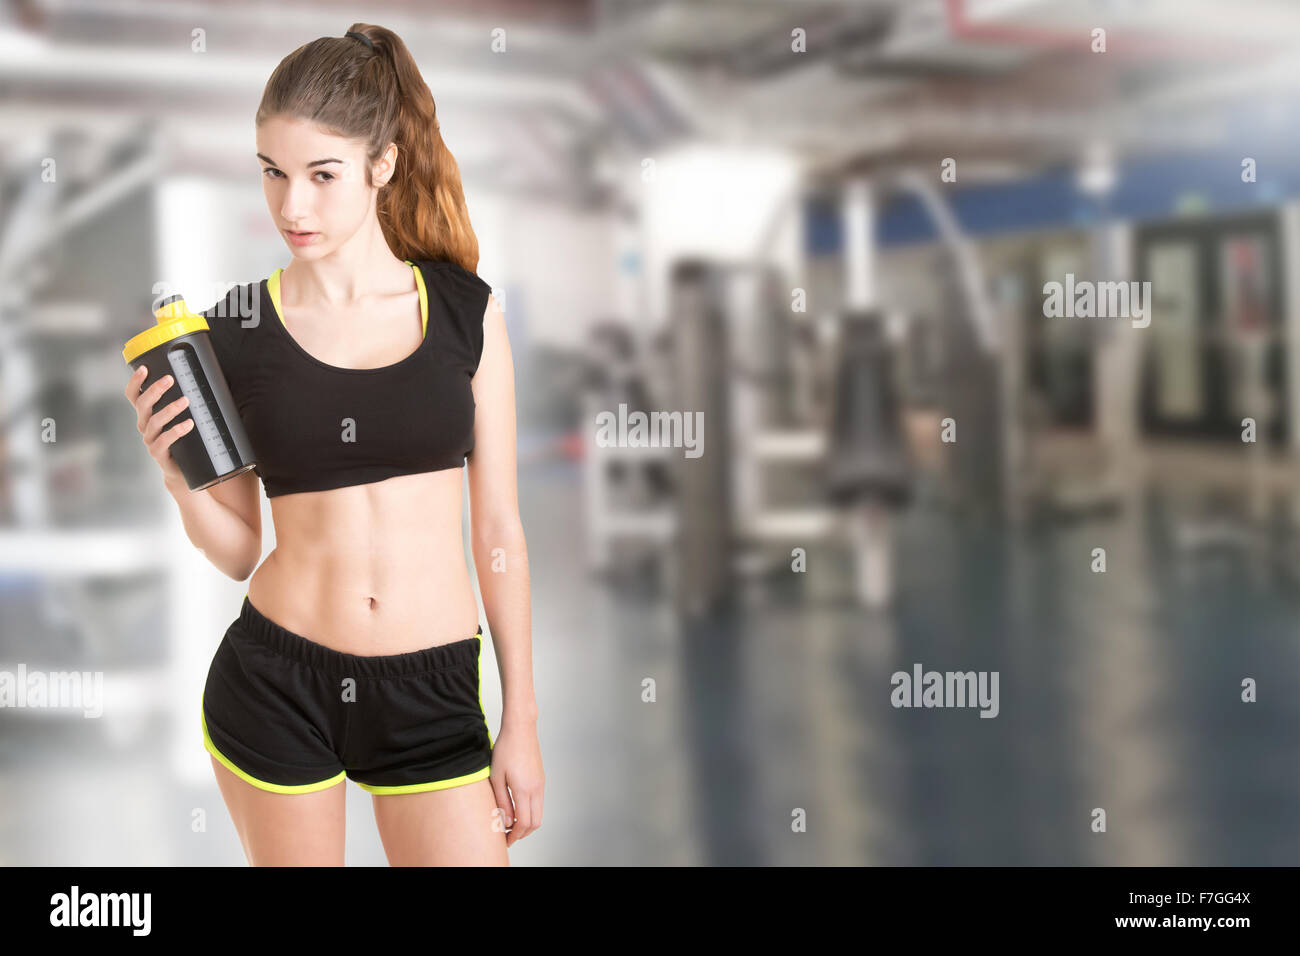 Woman about to drink a protein shake after a workout in the gym Stock Photo